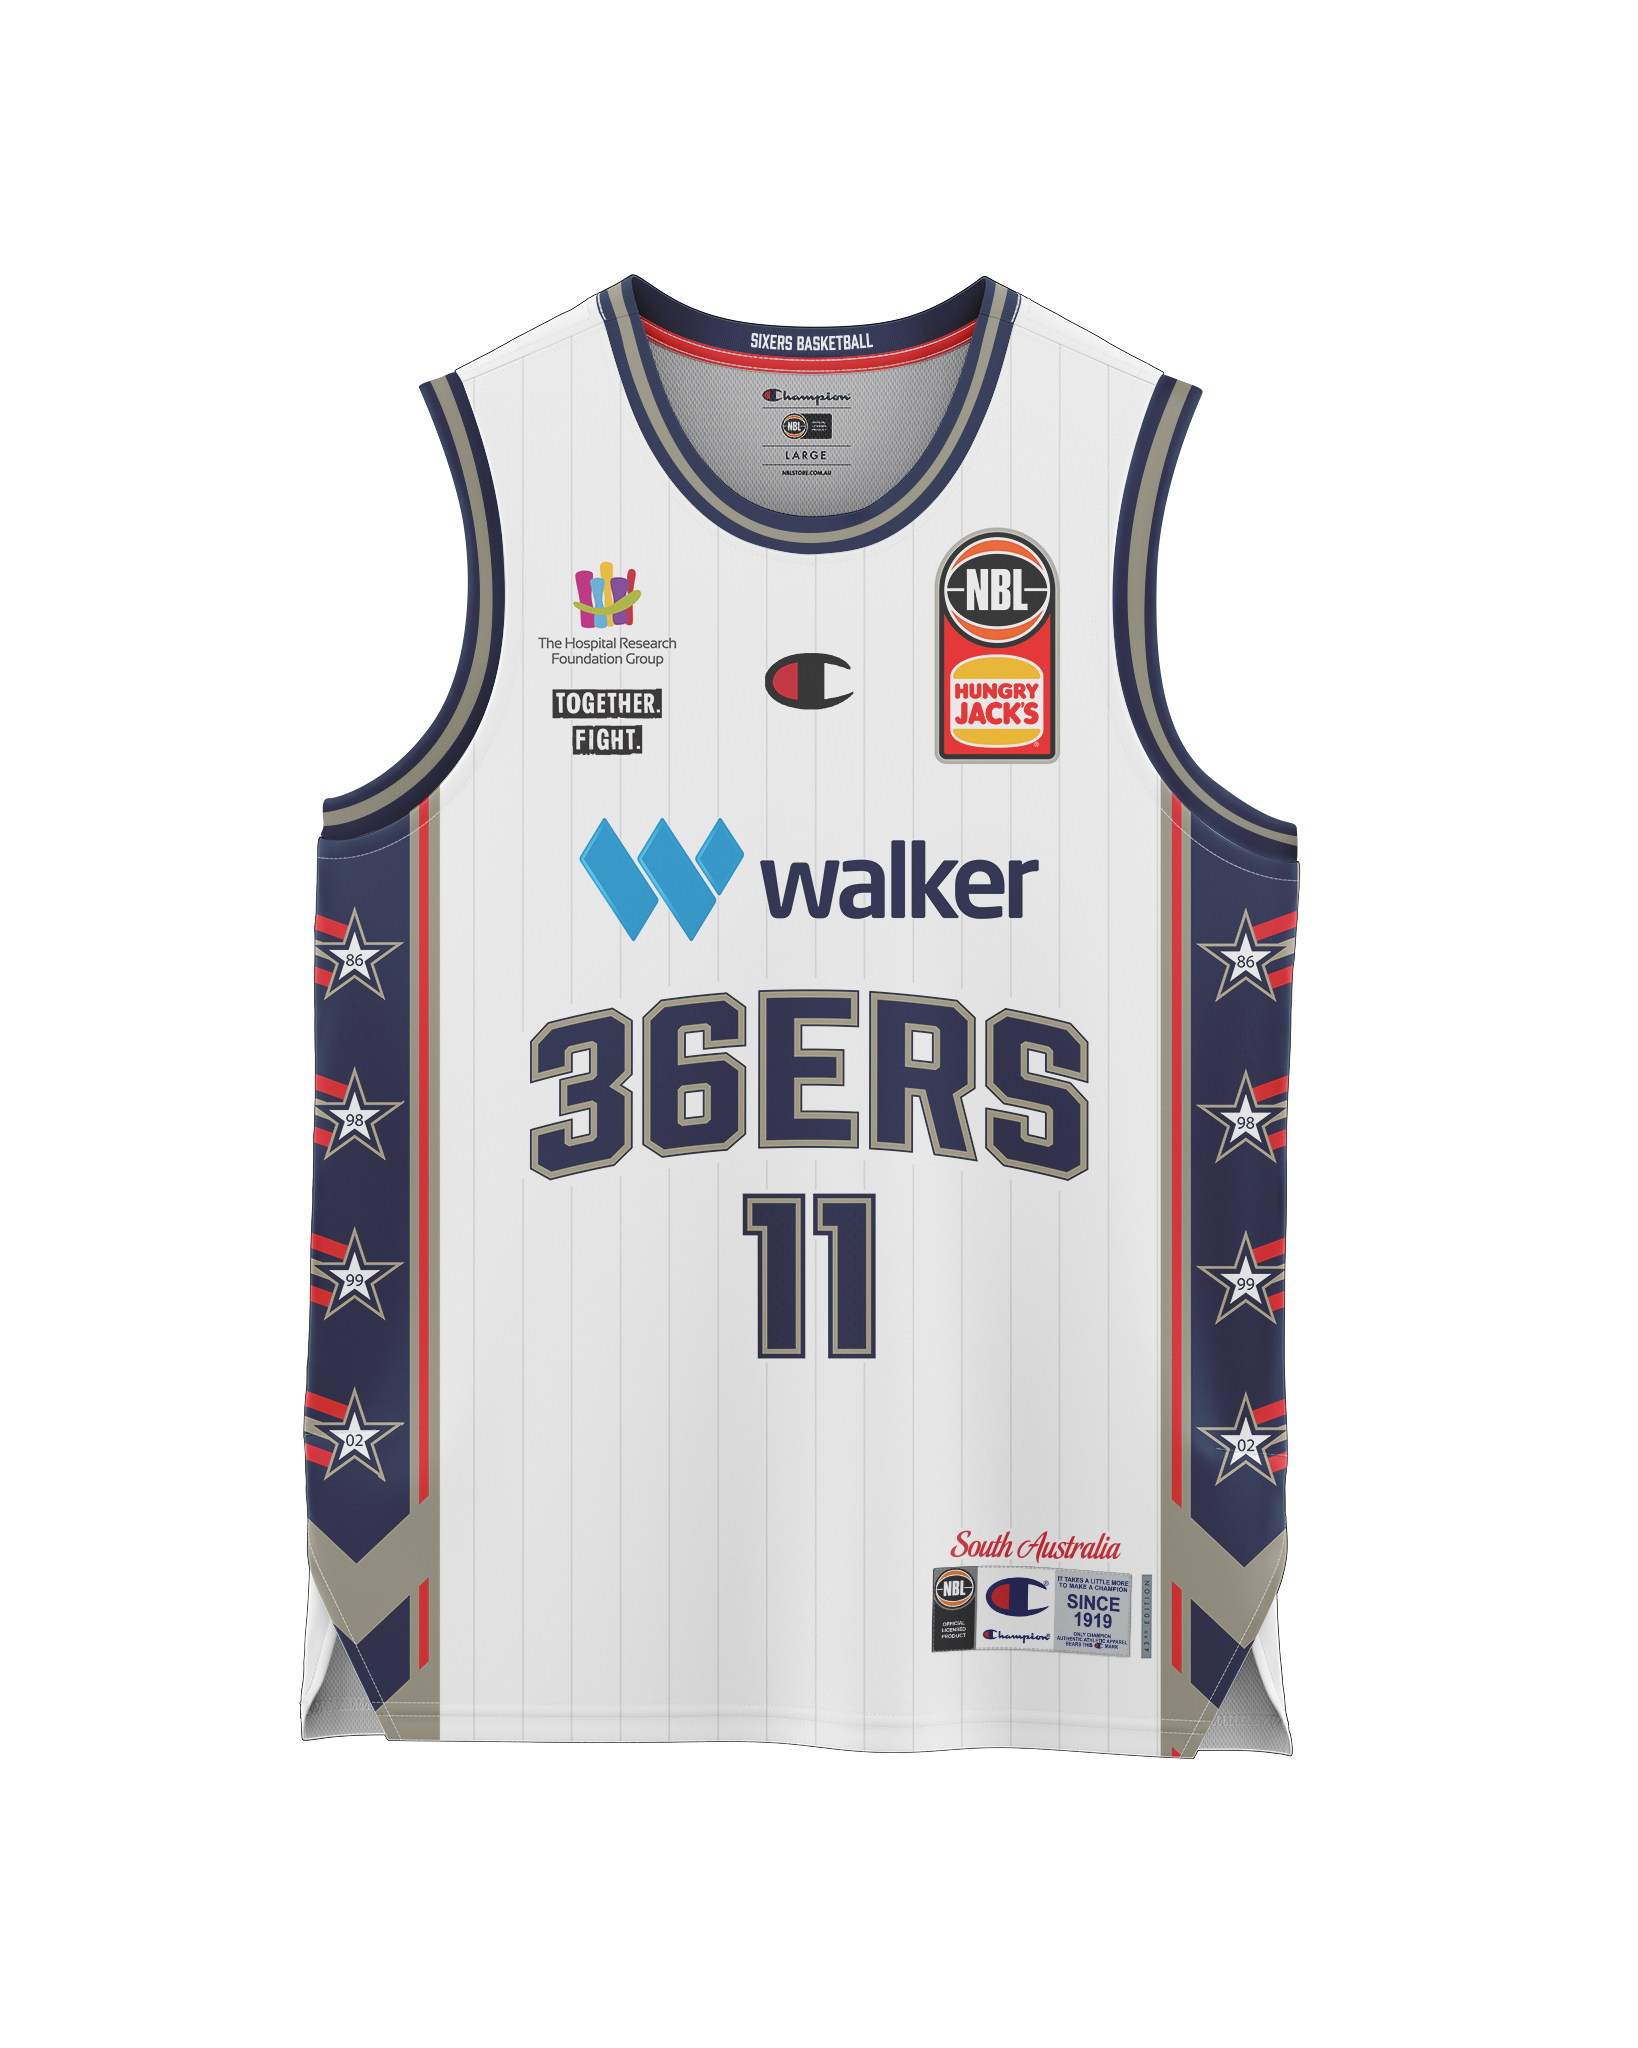 Adelaide 36ers 2021/22 Authentic Adult Away Jersey - Kai Sotto - Adelaide 36ers